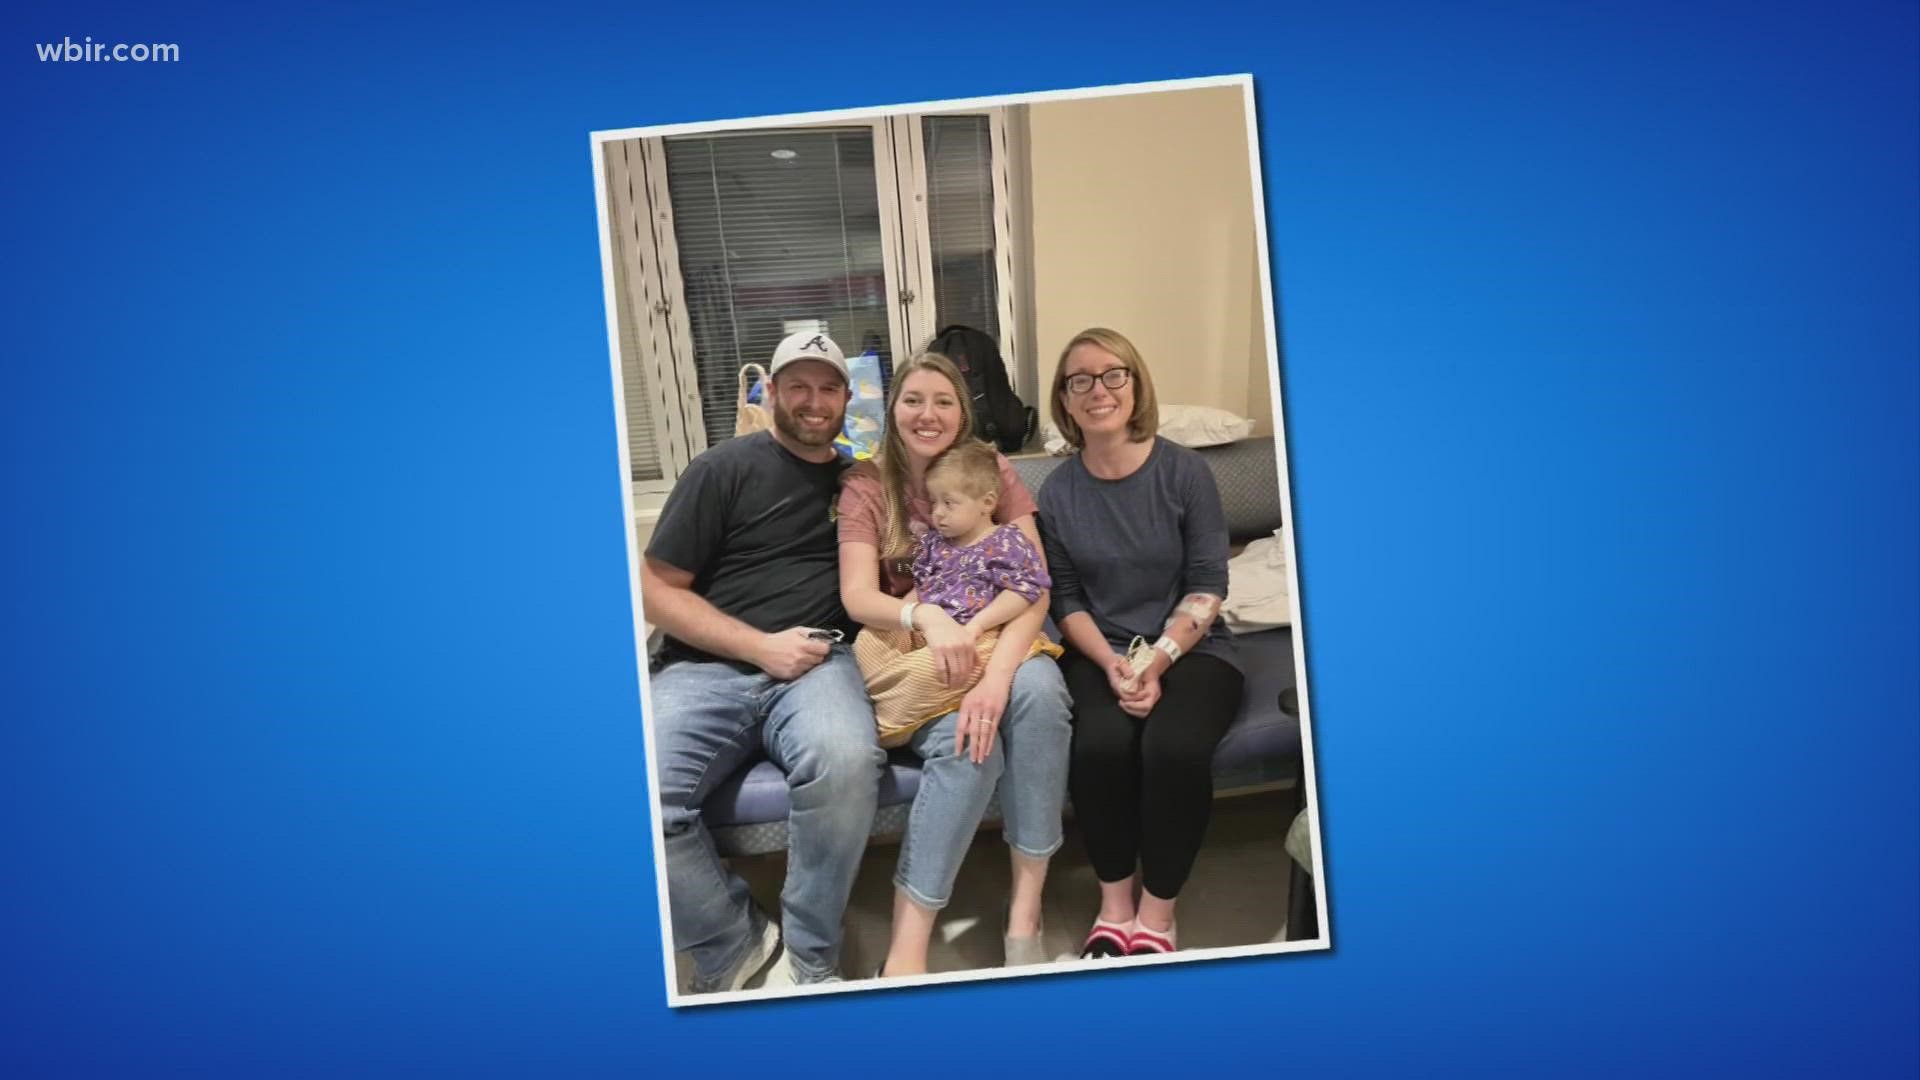 Finley Hickman's family prayed to find the perfect donor for him. A few months ago, they go their wish when a complete stranger offered hers up to donate.